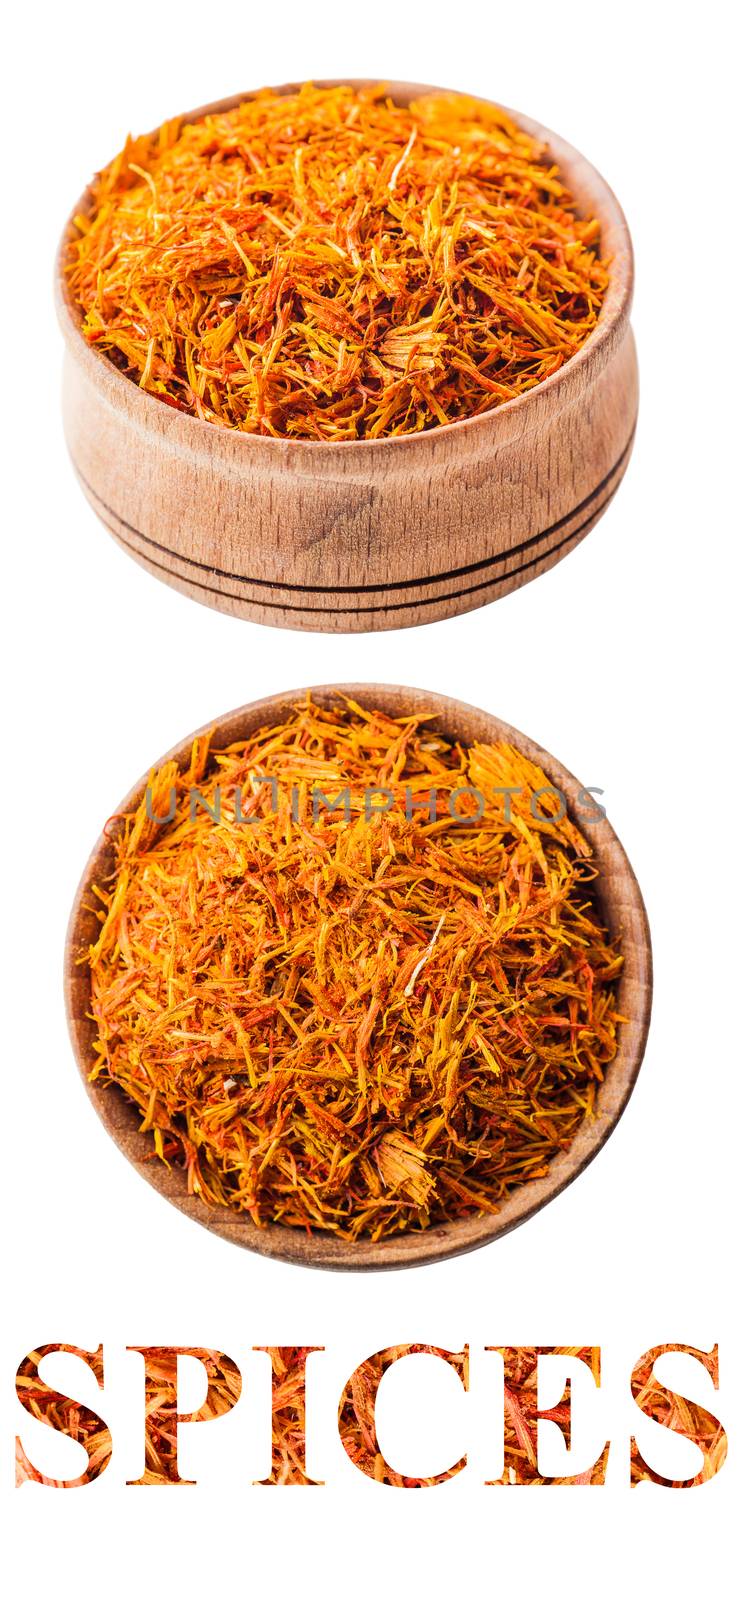 saffron in a wooden bowl isolated on white background